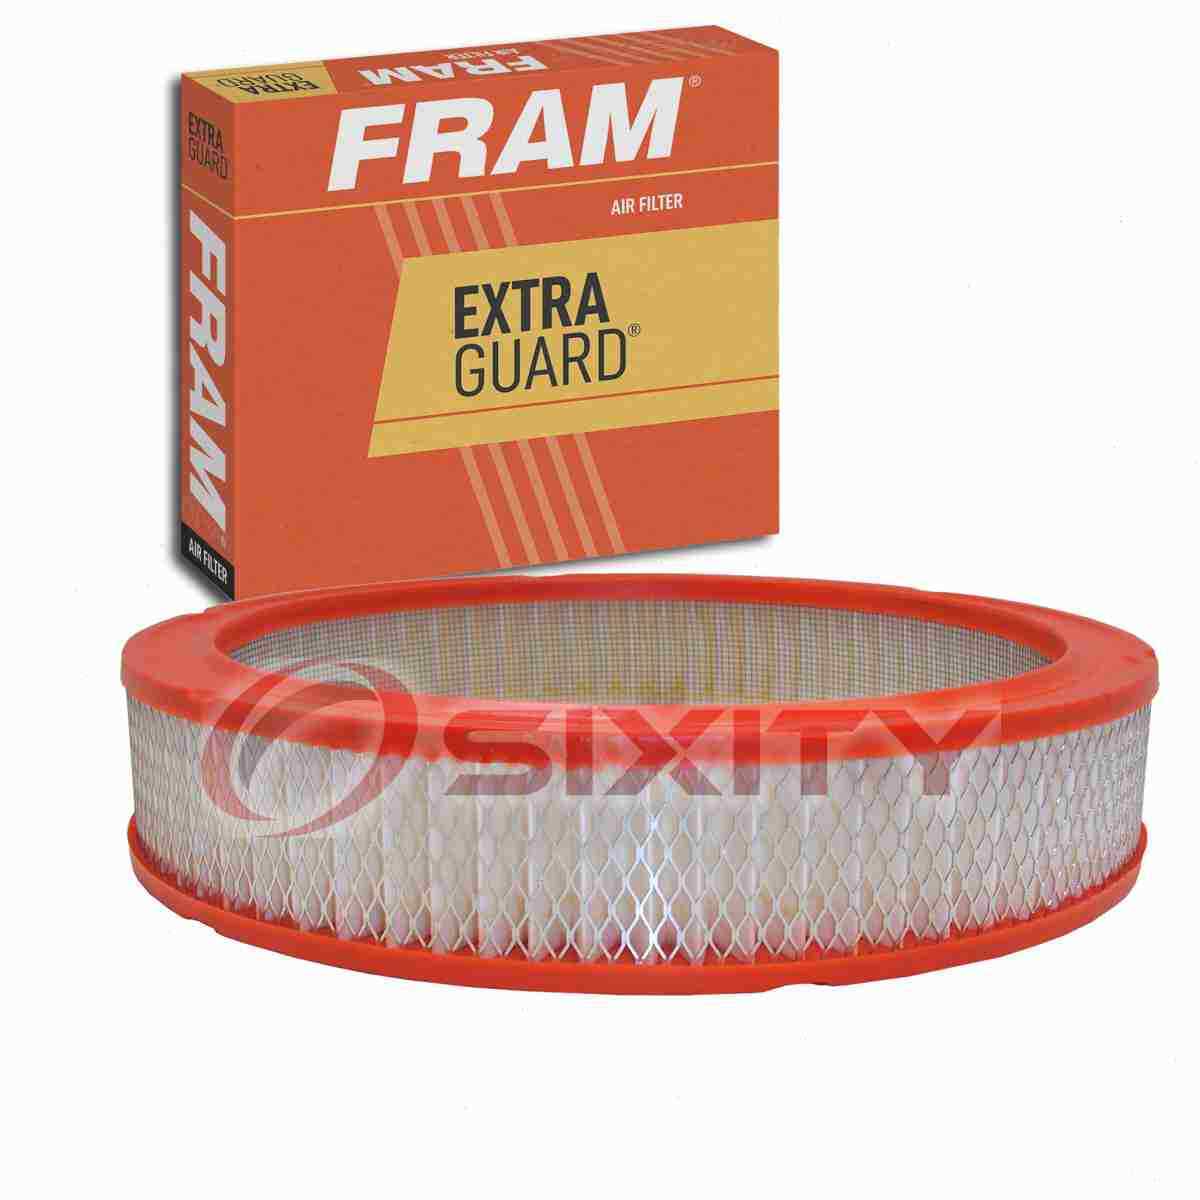 FRAM Extra Guard Air Filter for 1975-1980 Chevrolet Monza Intake Inlet qd